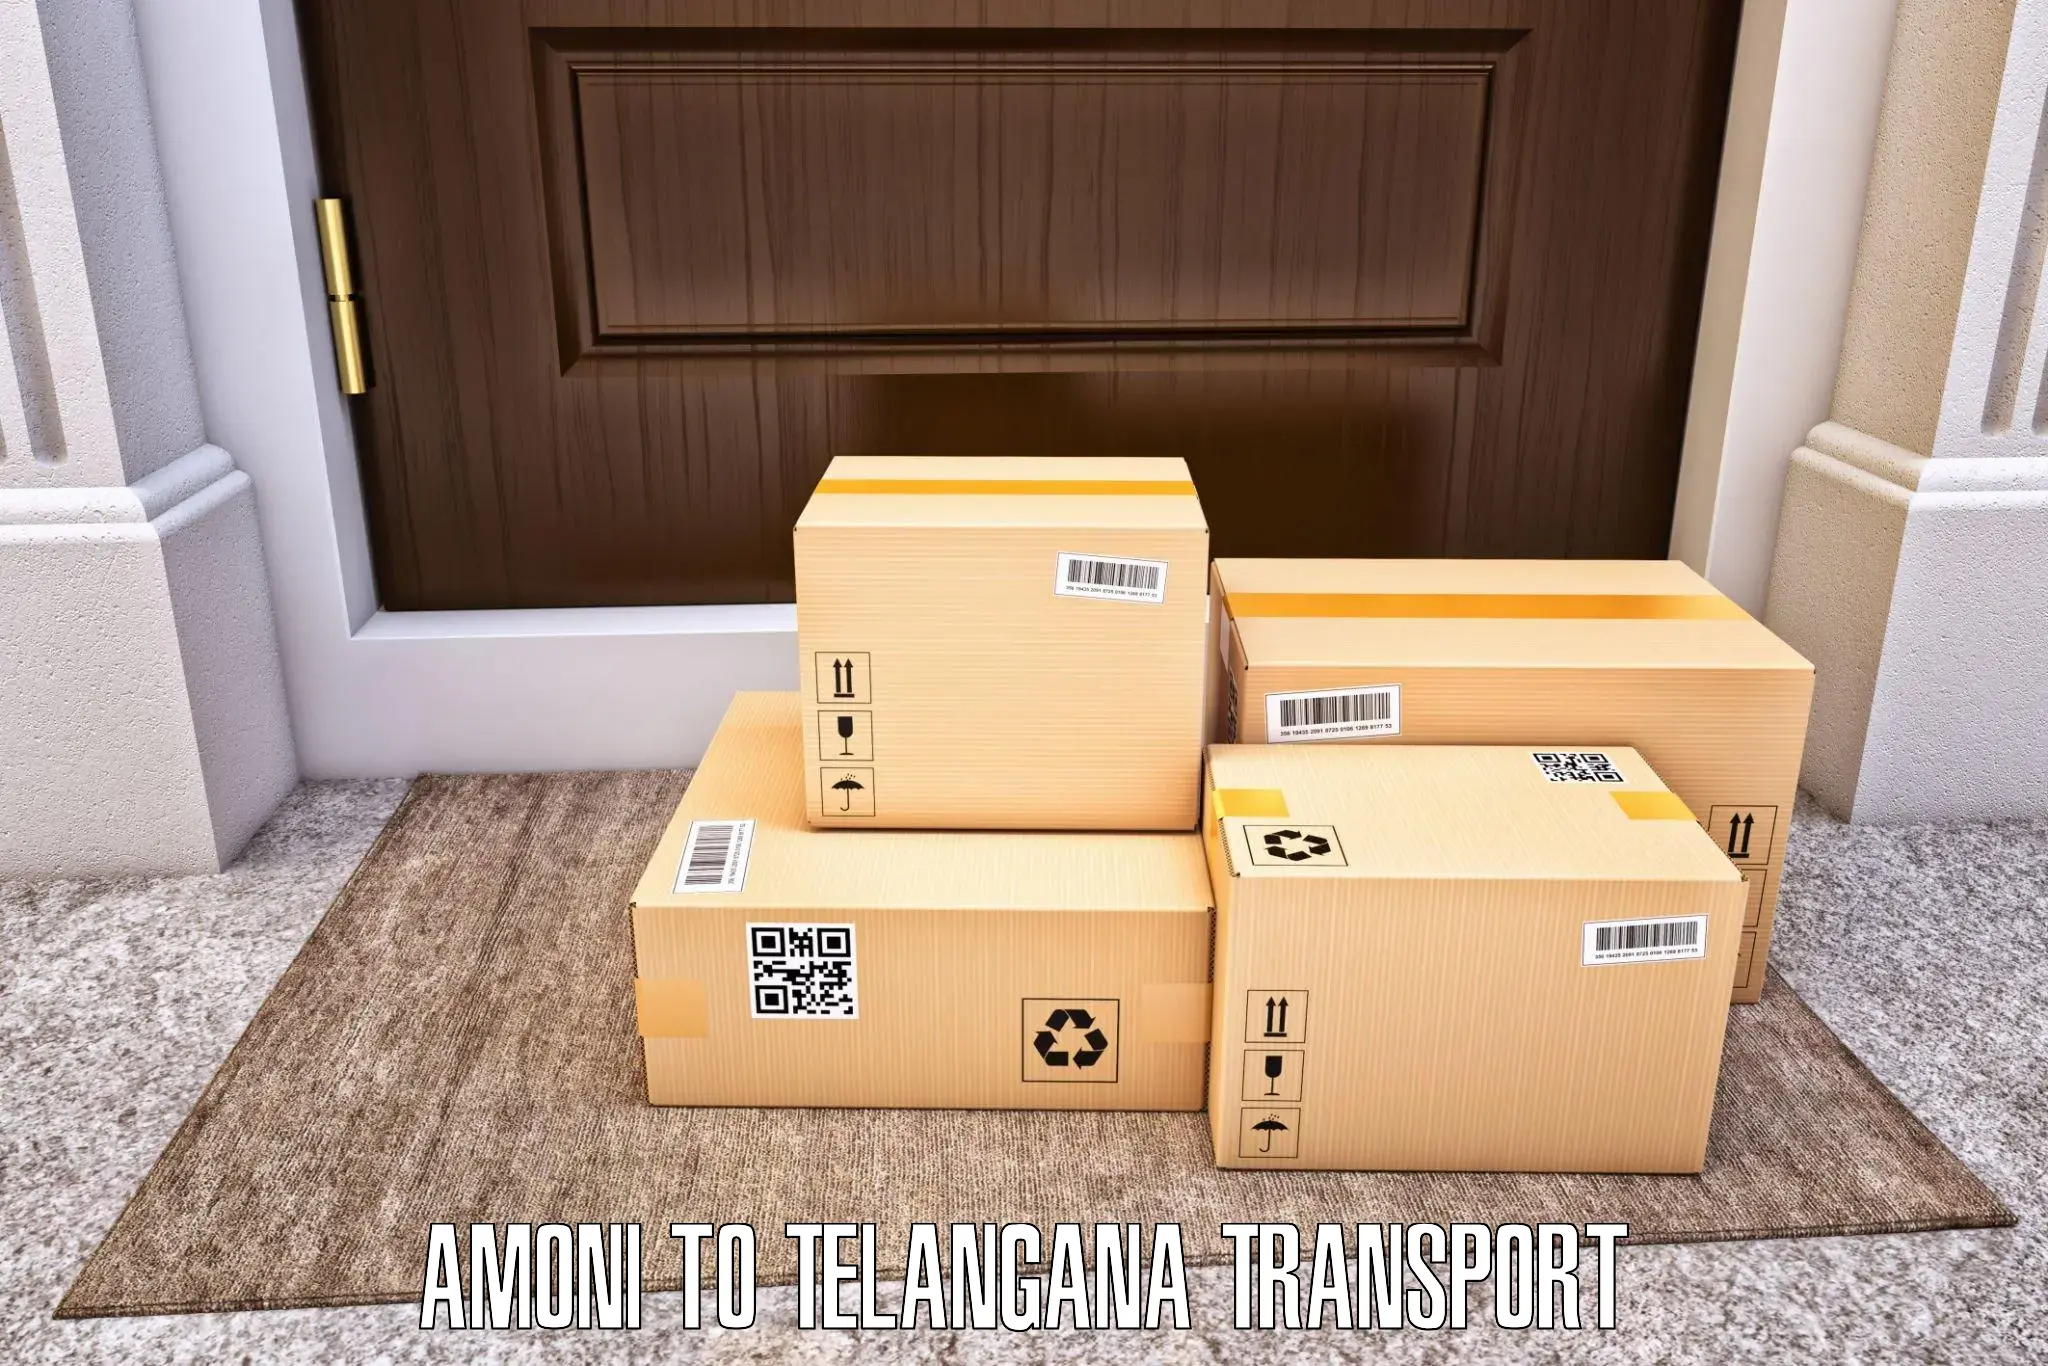 Commercial transport service Amoni to Hyderabad